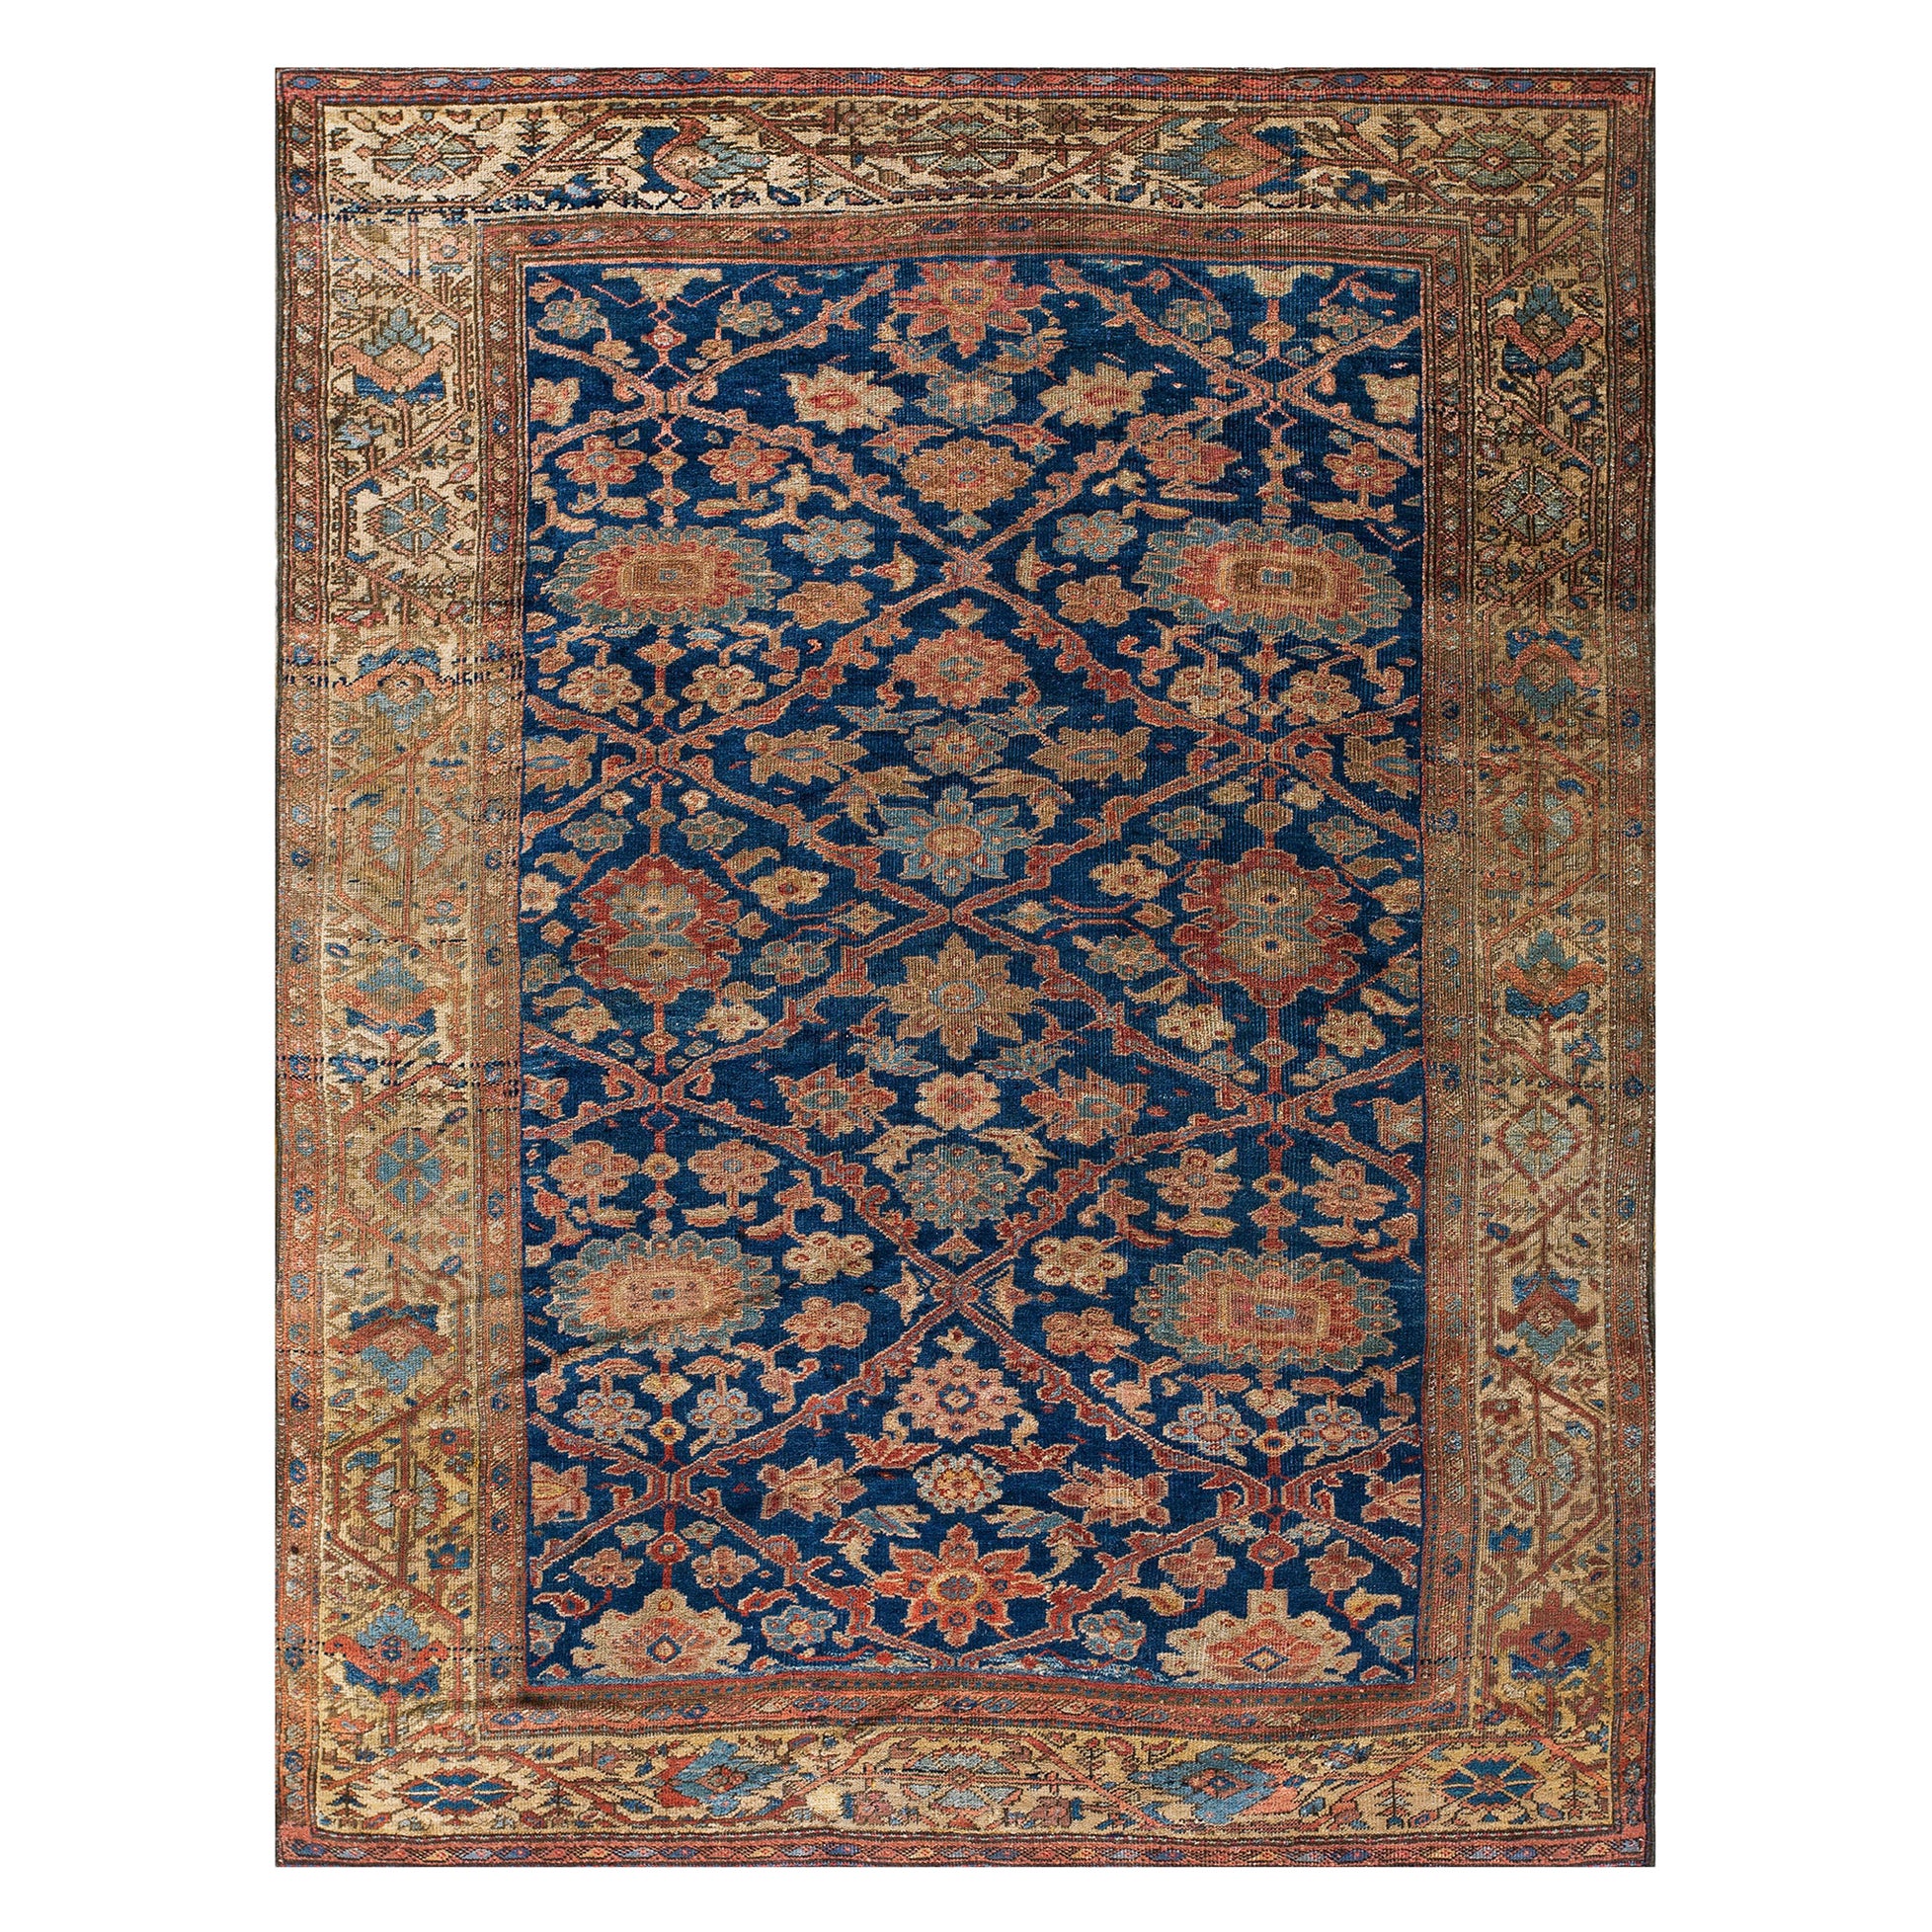 Late 19th Century Persian Sultanabad Carpet ( 6'2" x 7'9" - 188 x 236 cm )